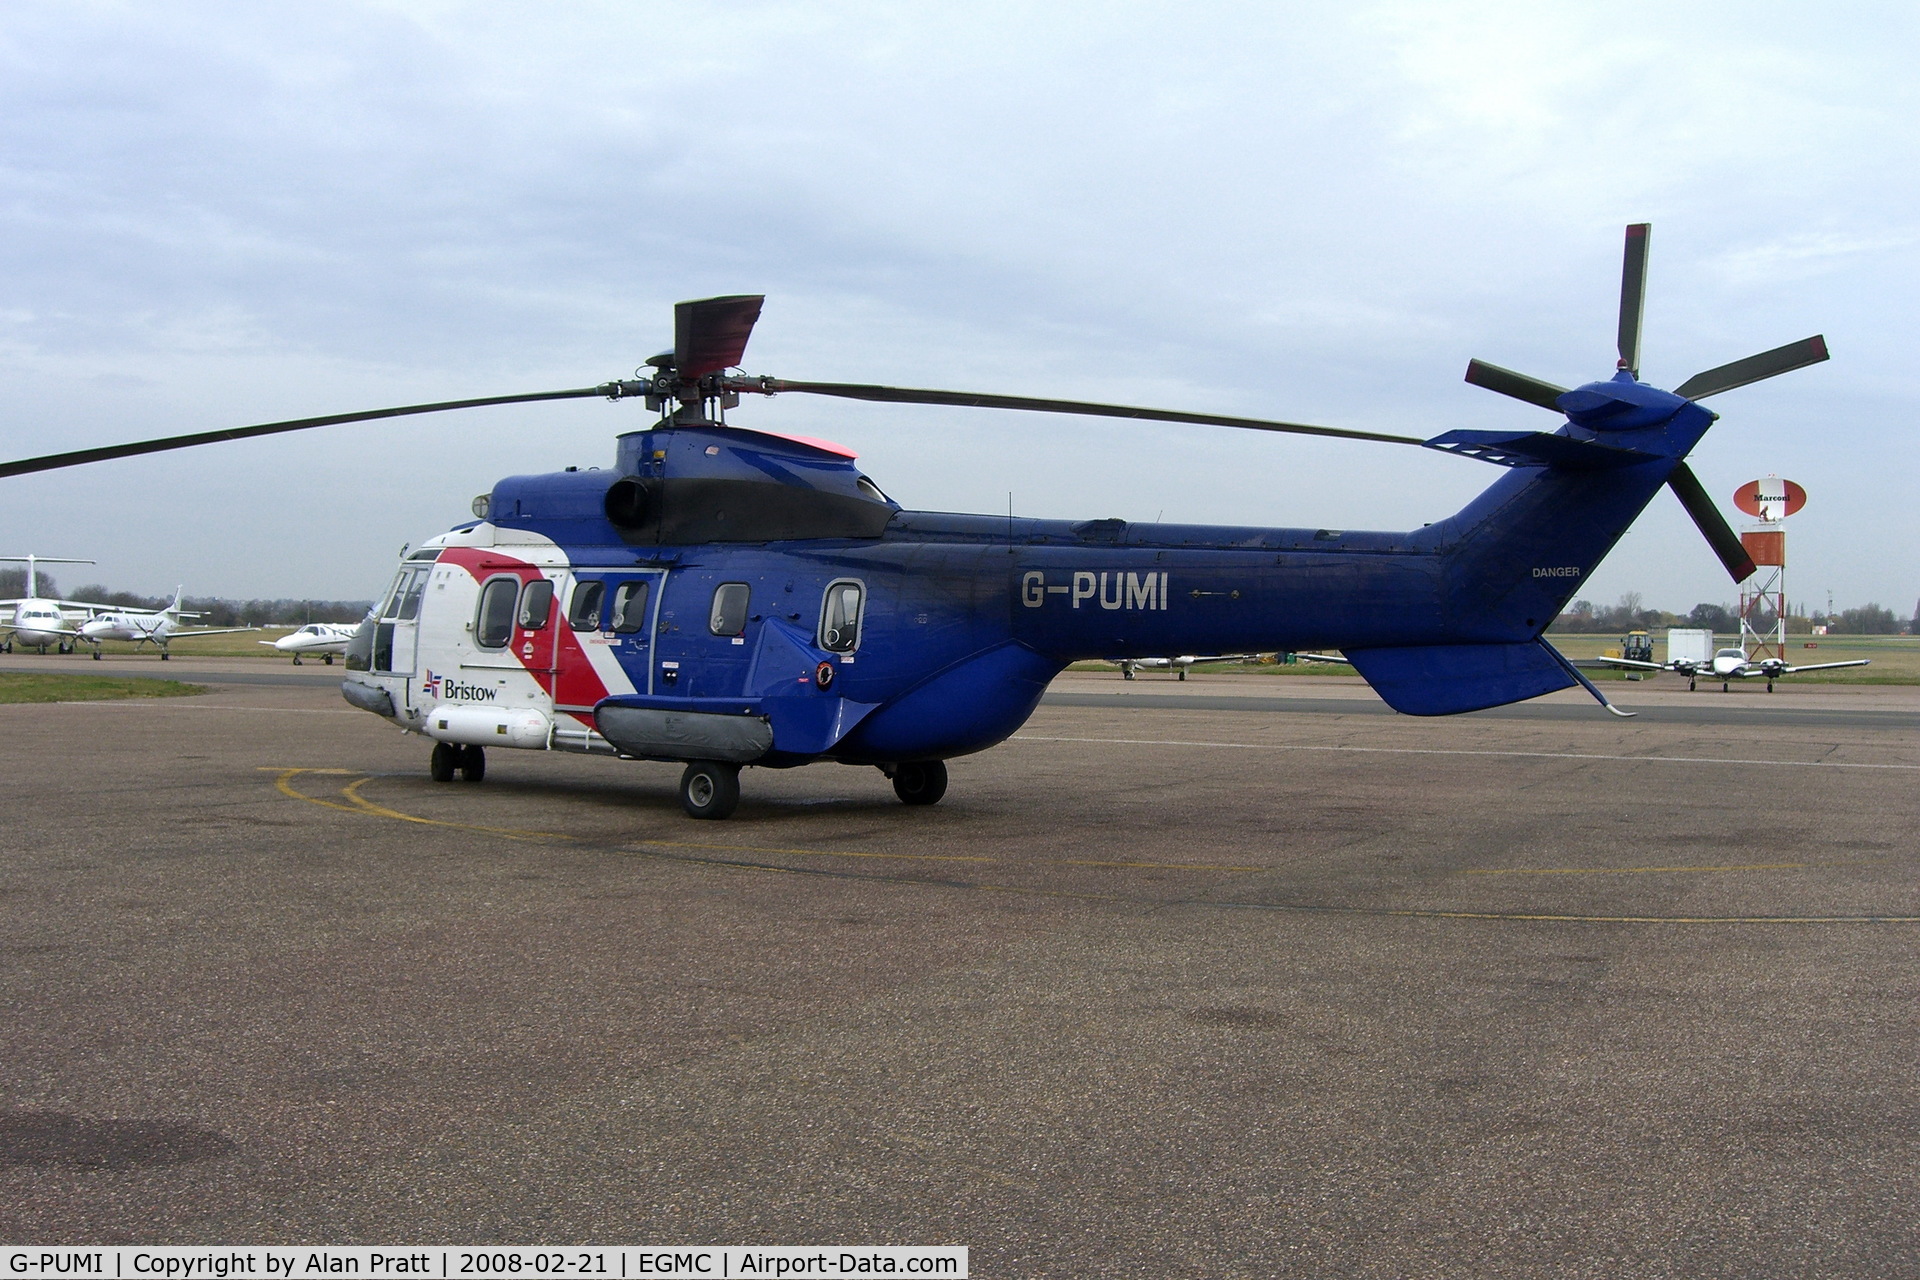 G-PUMI, 1985 Aerospatiale AS-332L Super Puma C/N 2170, In Bristow Helicopters livery on stand after diverting to airport.